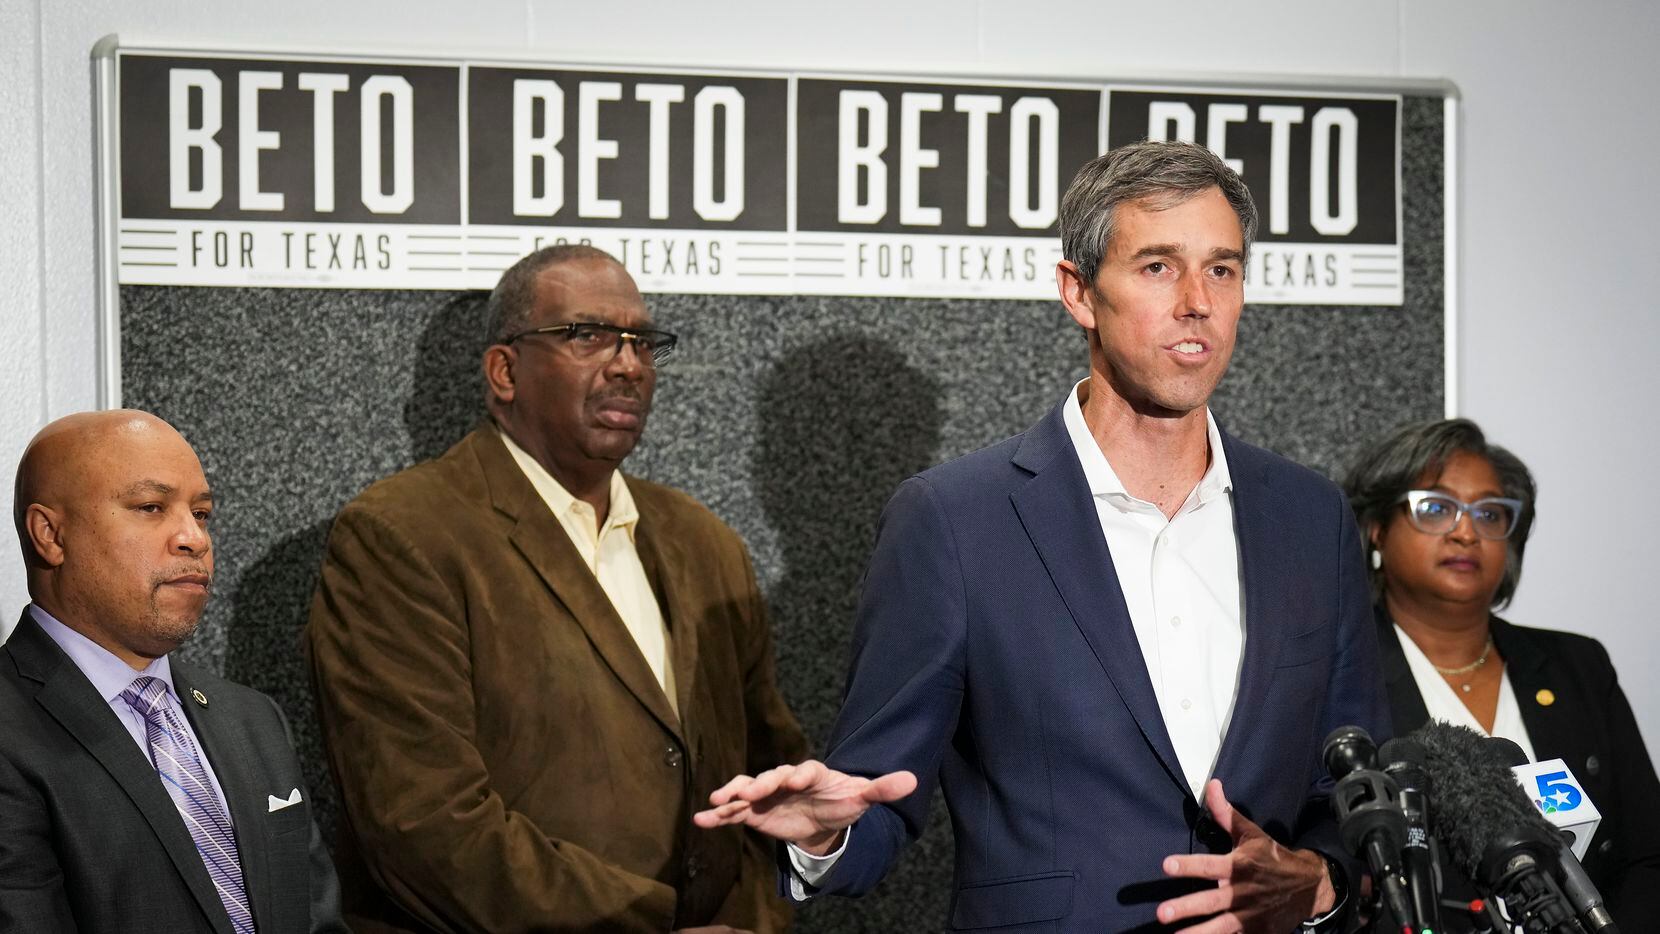 Democratic candidate for governor Beto O'Rourke is flanked by (from left) State Rep. Carl...